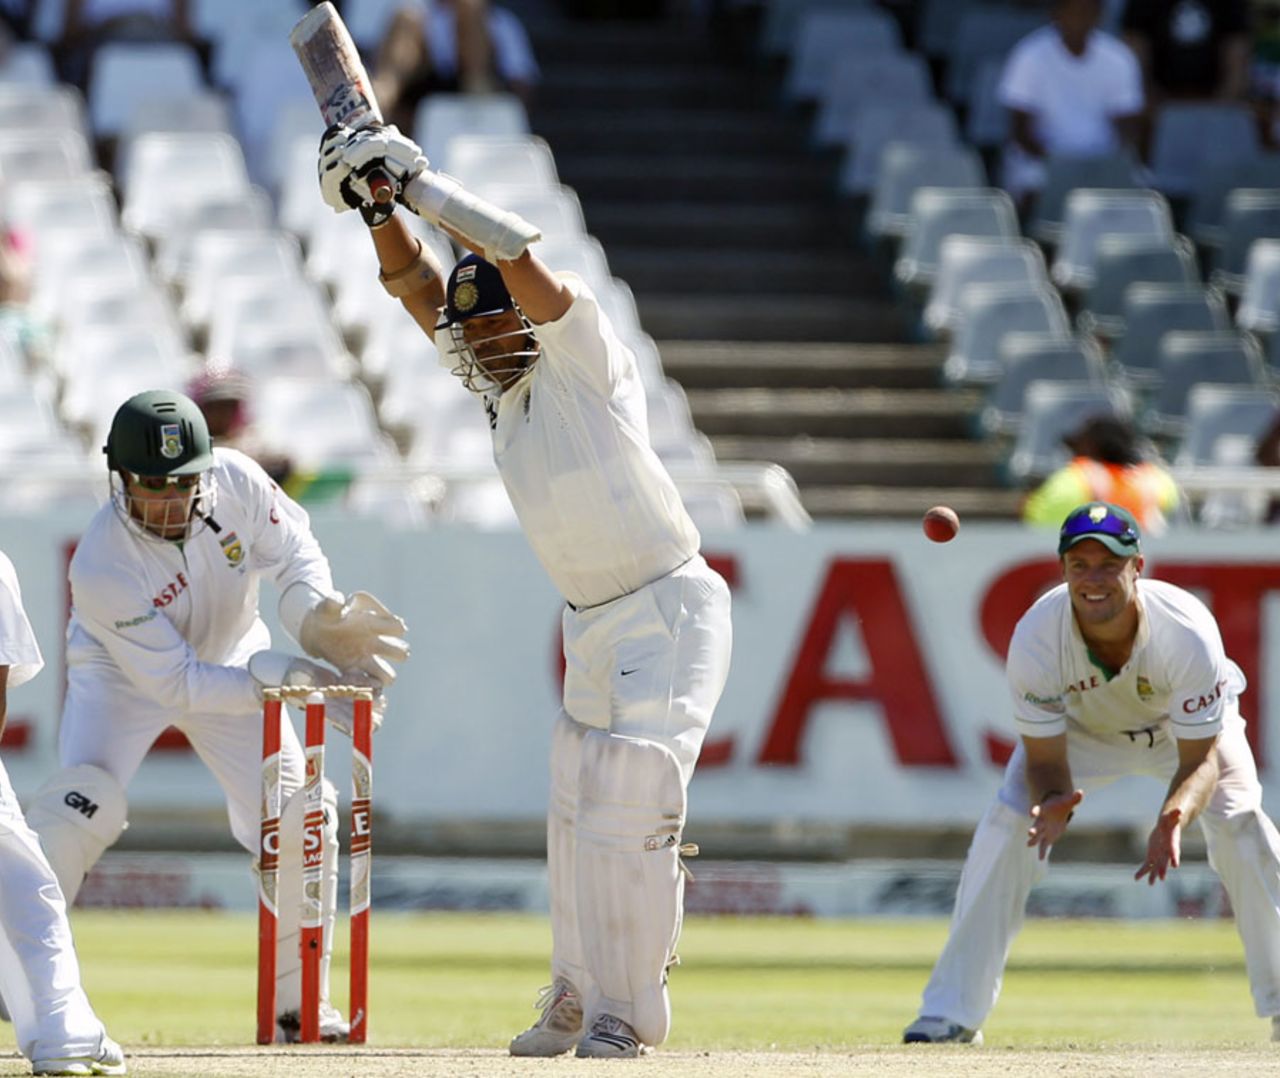 Sachin Tendulkar doesn't offer a shot, South Africa v India, 3rd Test, Cape Town, 5th day, January 6, 2011